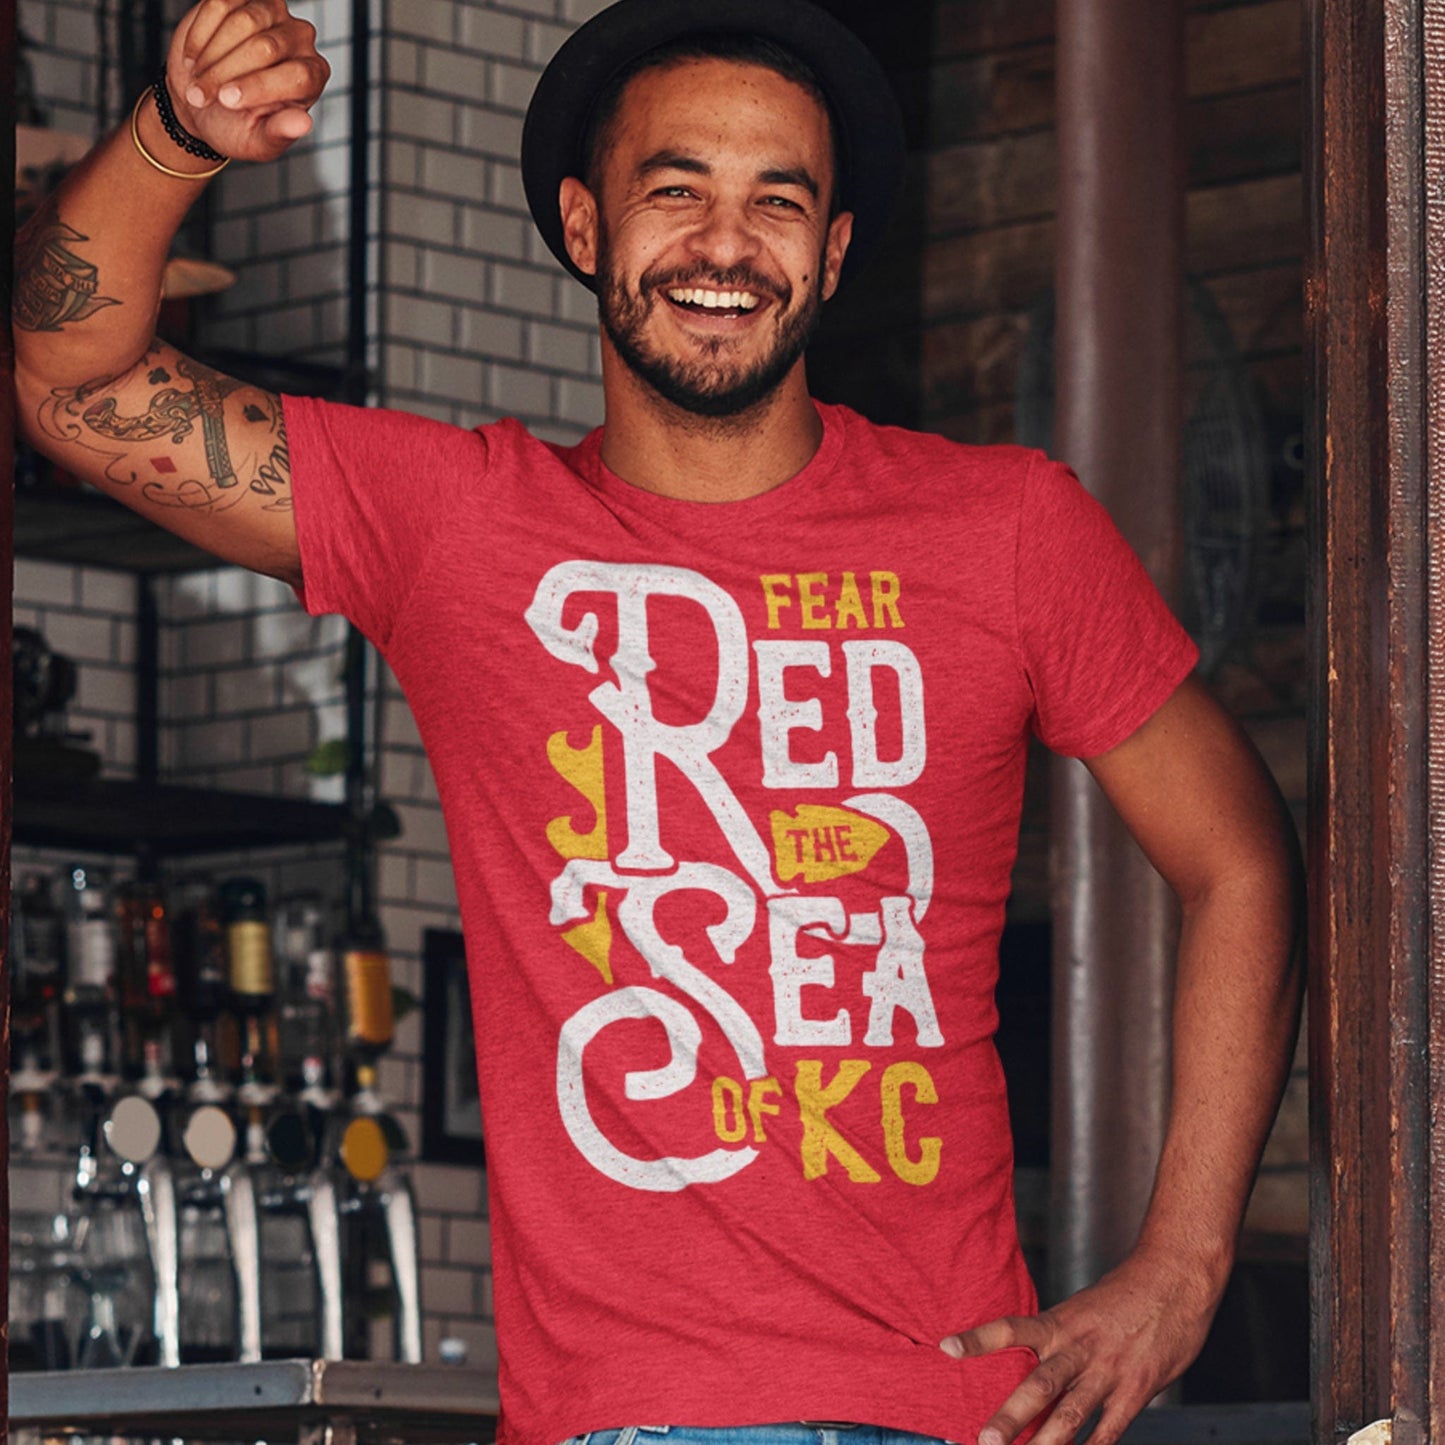 KC Swag Kansas City Chiefs SEA OF RED on heather red t-shirt worn by male model standing in pub doorway